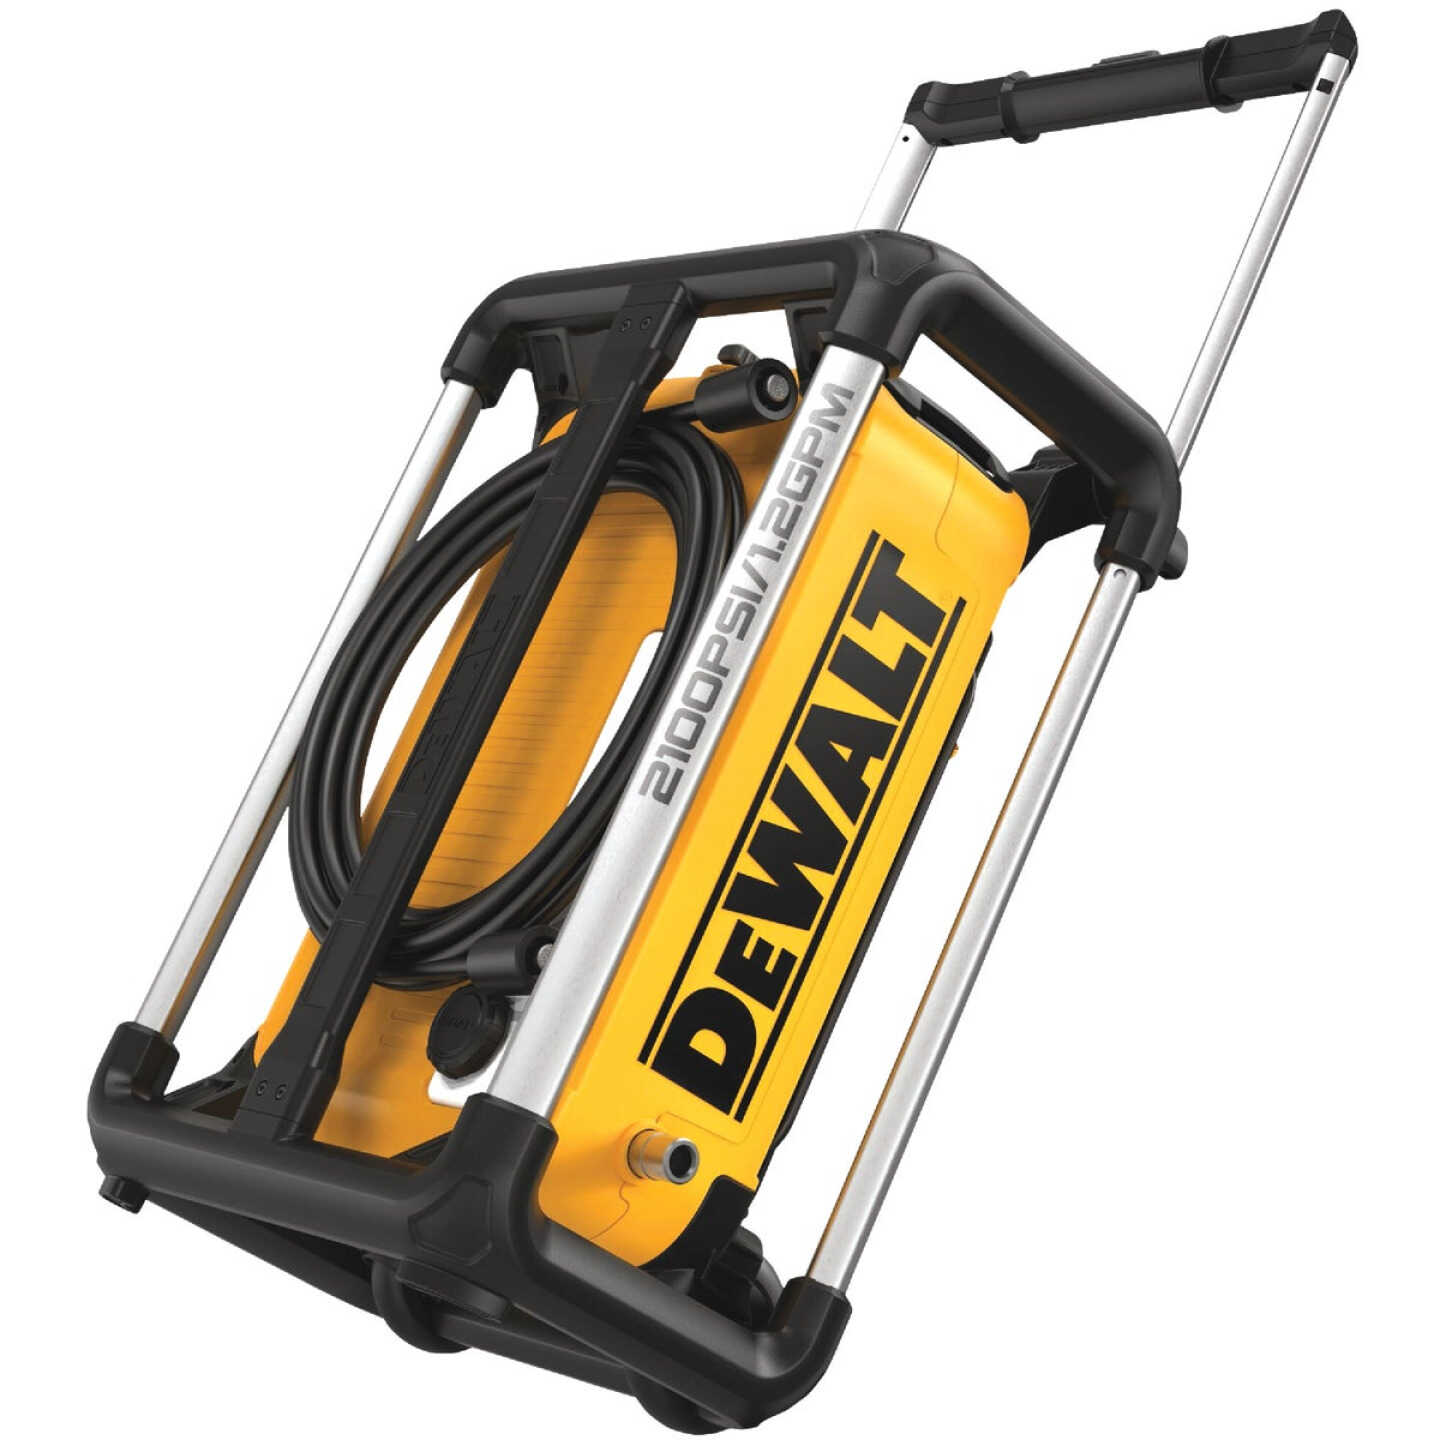 DEWALT 2100 psi 1.2 GPM Cold Water Compact Electric Jobsite Pressure Washer  - Brownsboro Hardware & Paint